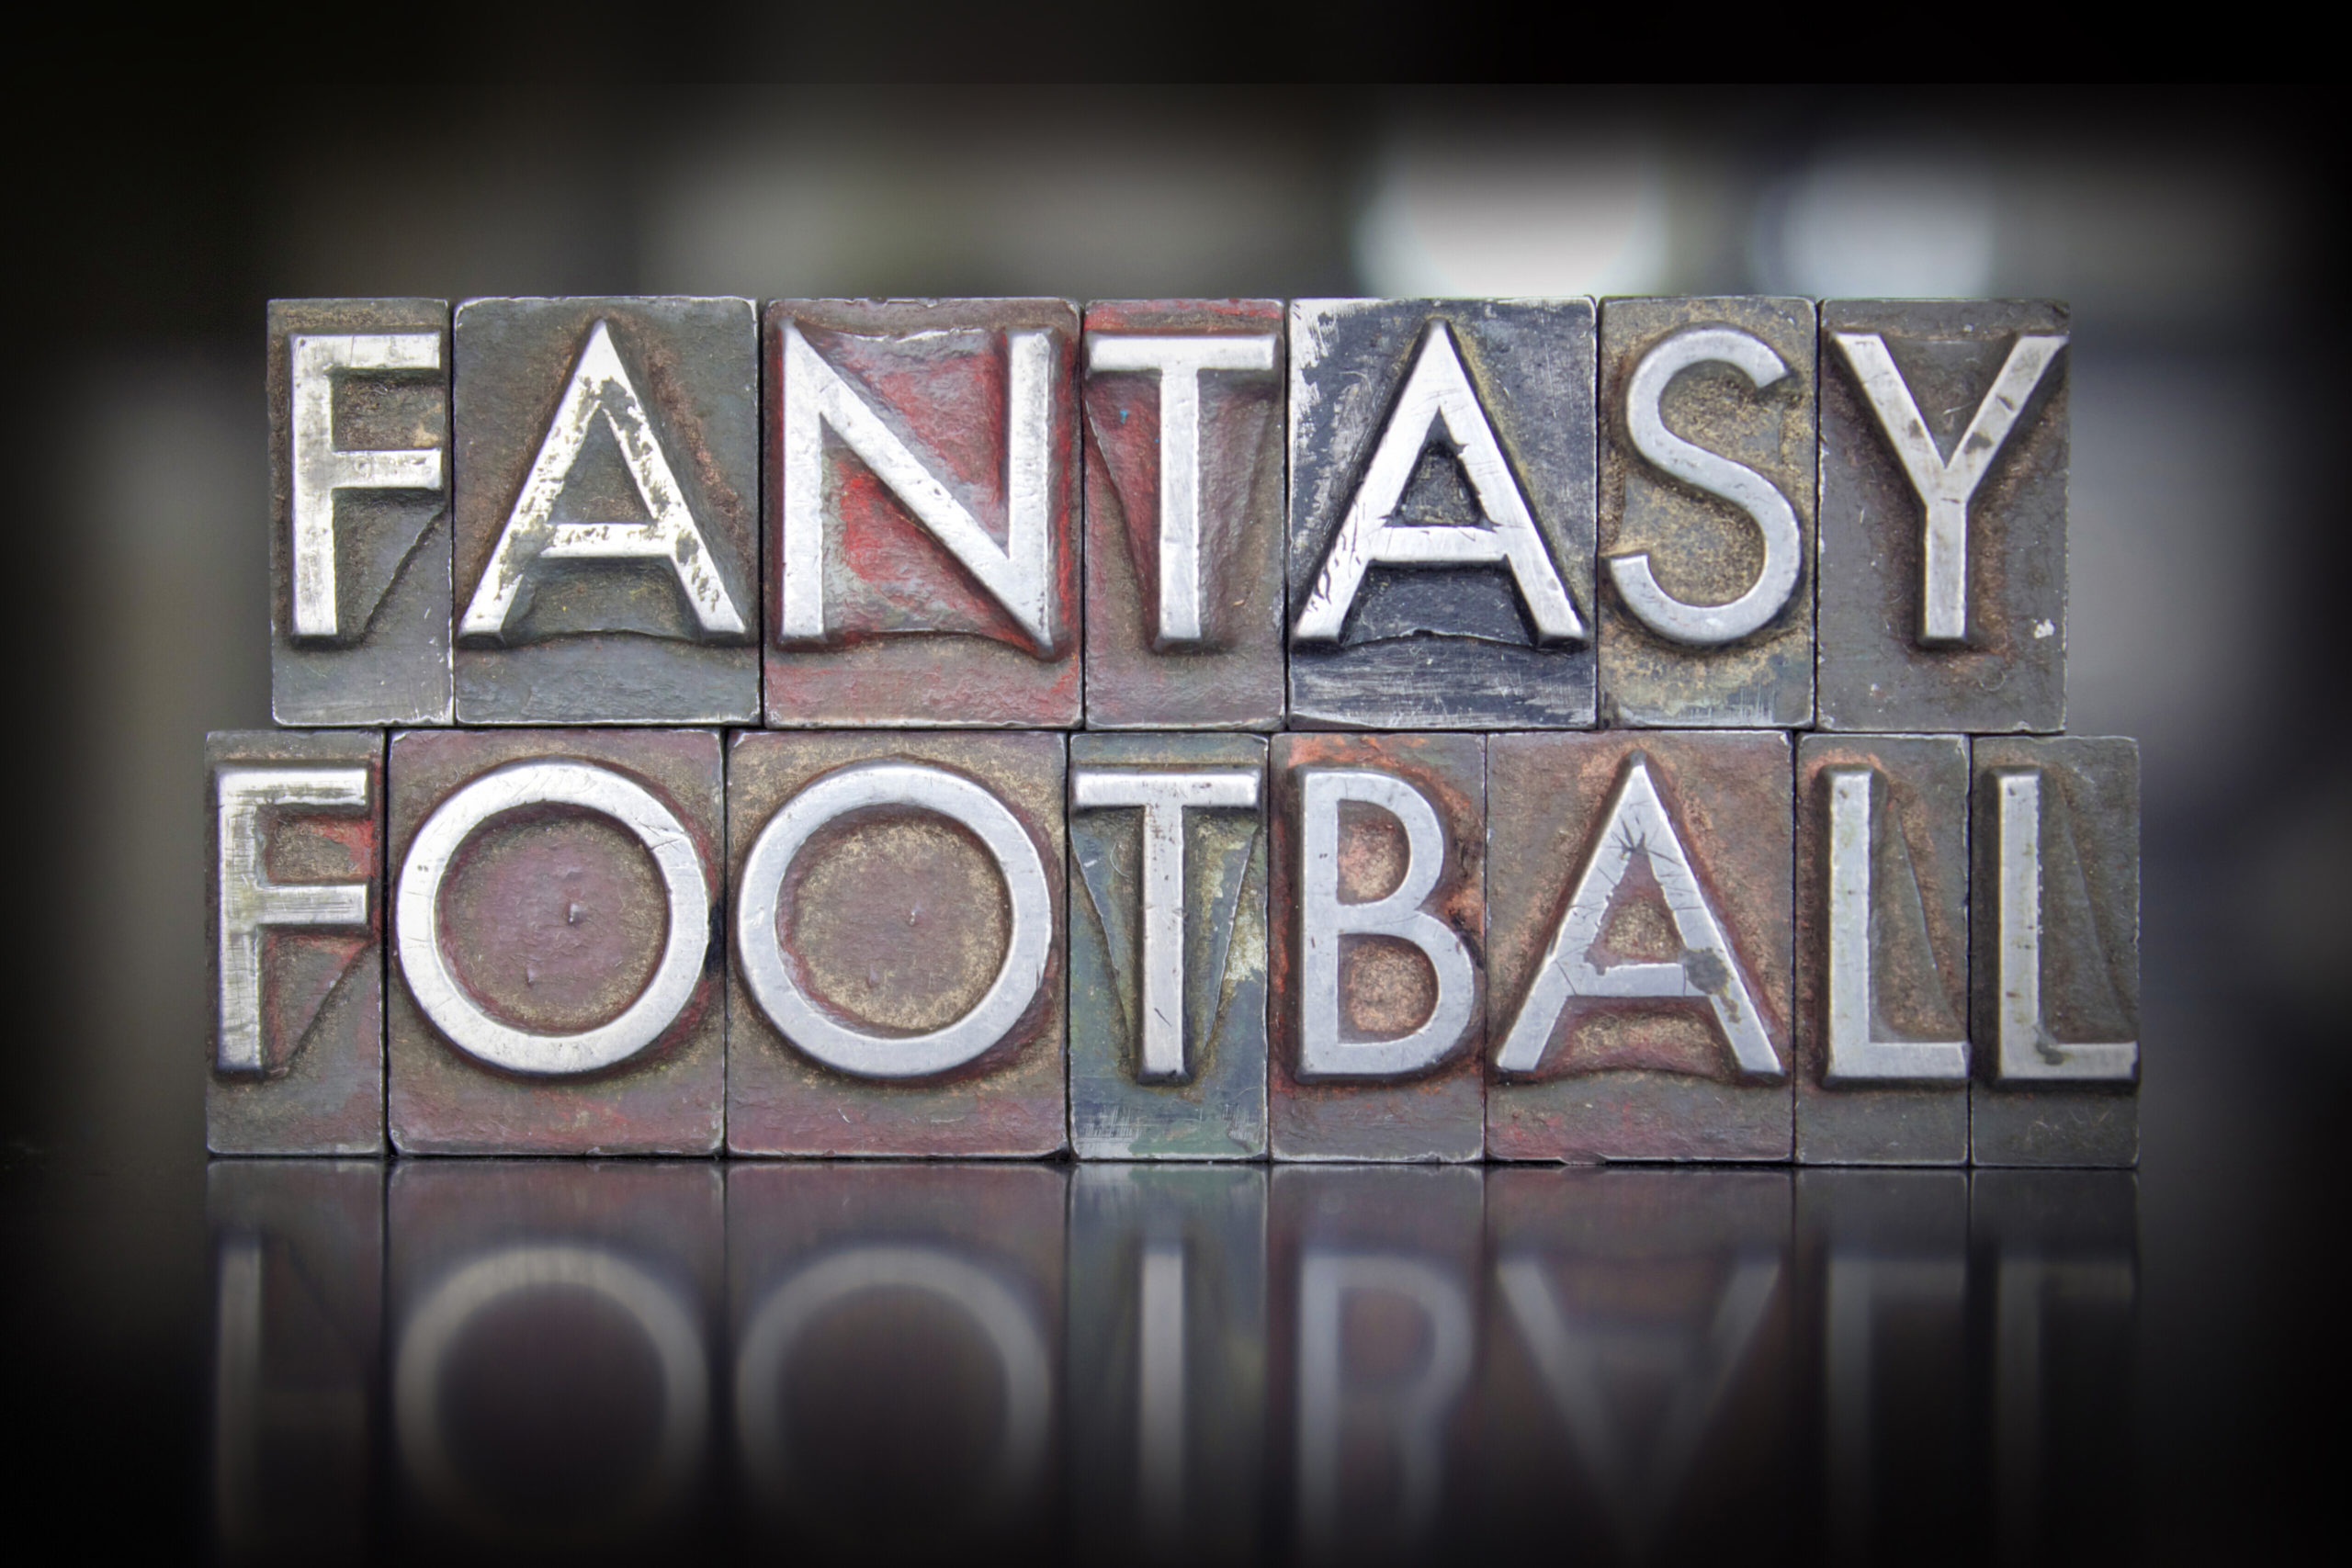 Fantasy Football managers asked for an unusual request